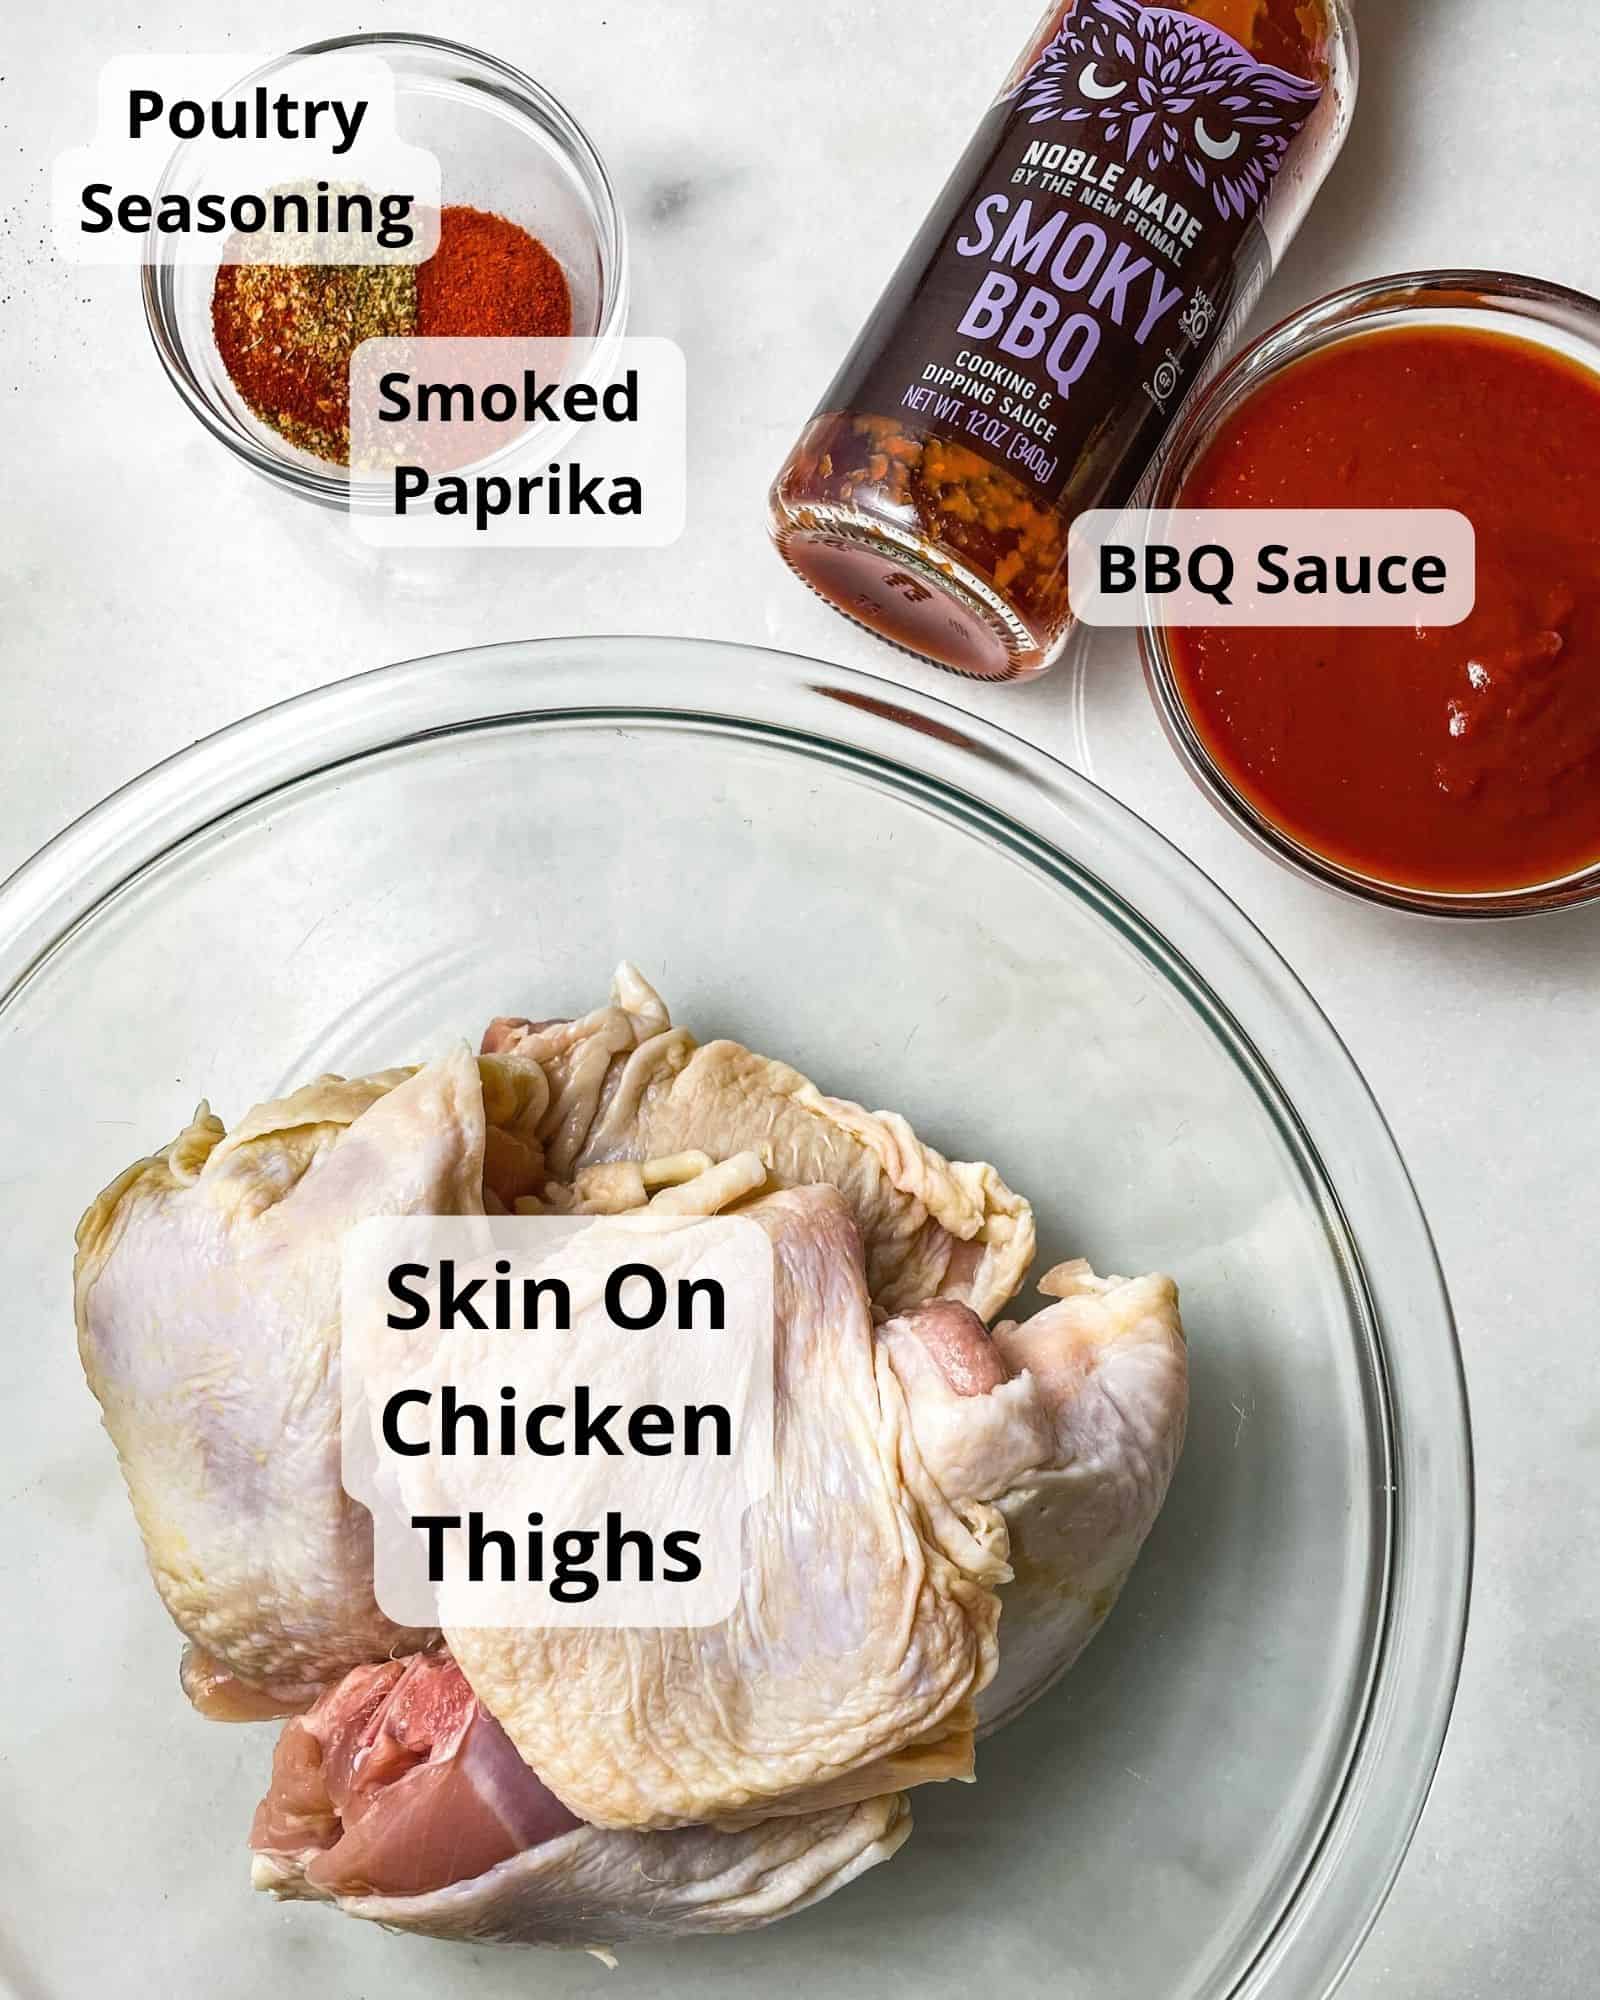 ingredients to make baked bbq chicken thighs - chicken thighs, bbq sauce, poultry seasoning, and smoked paprika.